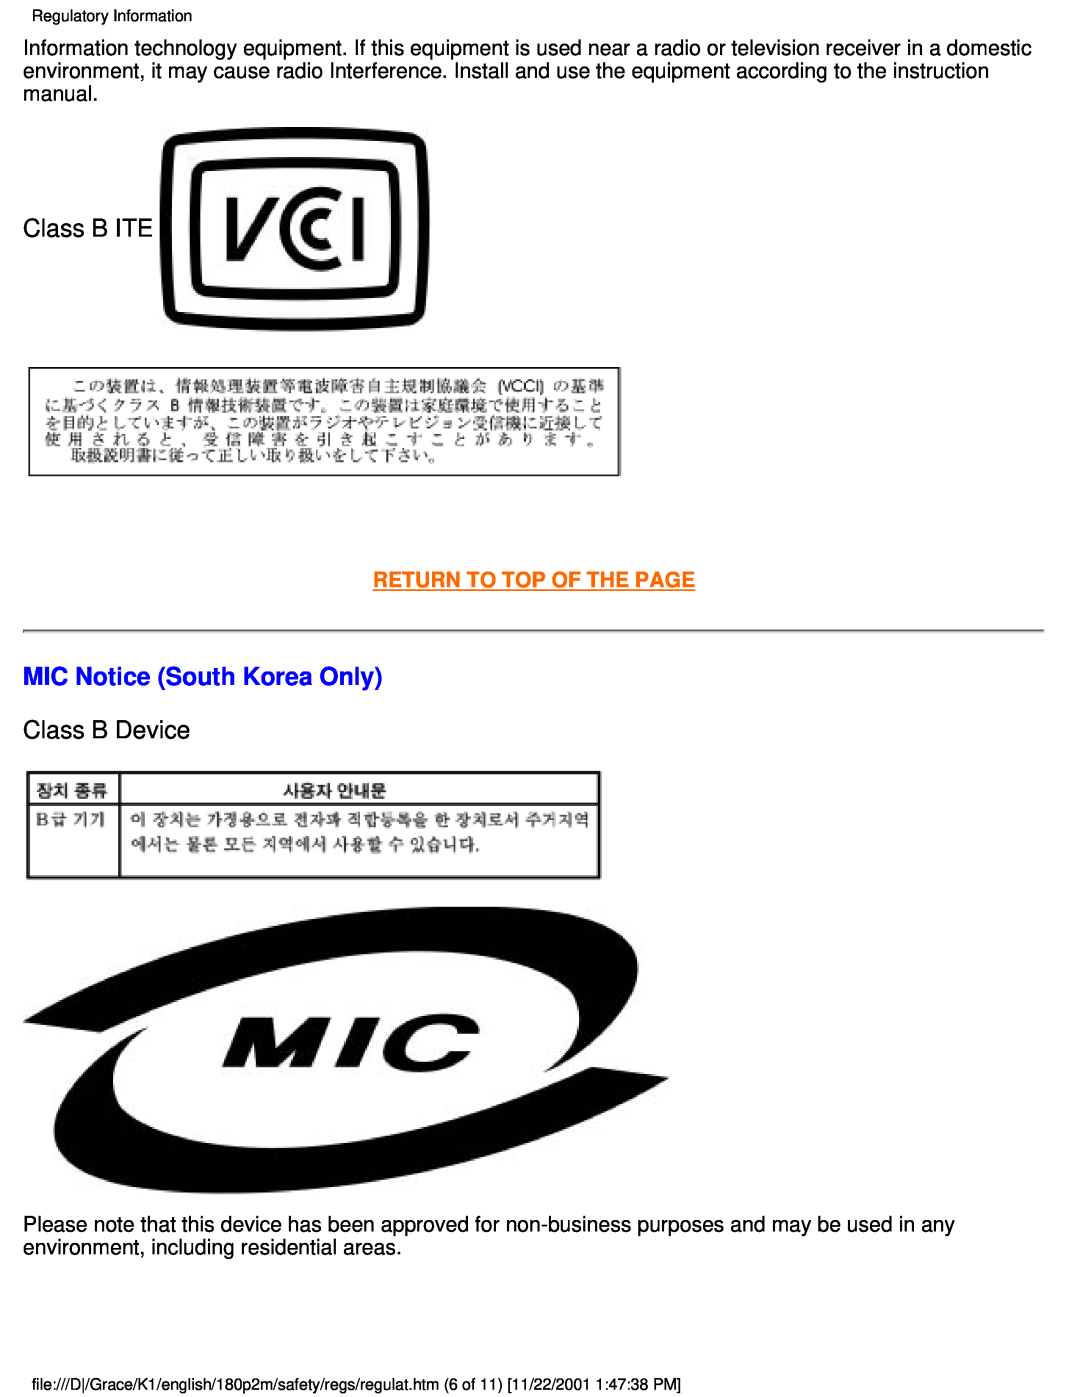 Philips 180P2M user manual MIC Notice South Korea Only, Class B ITE, Class B Device, Return To Top Of The Page 